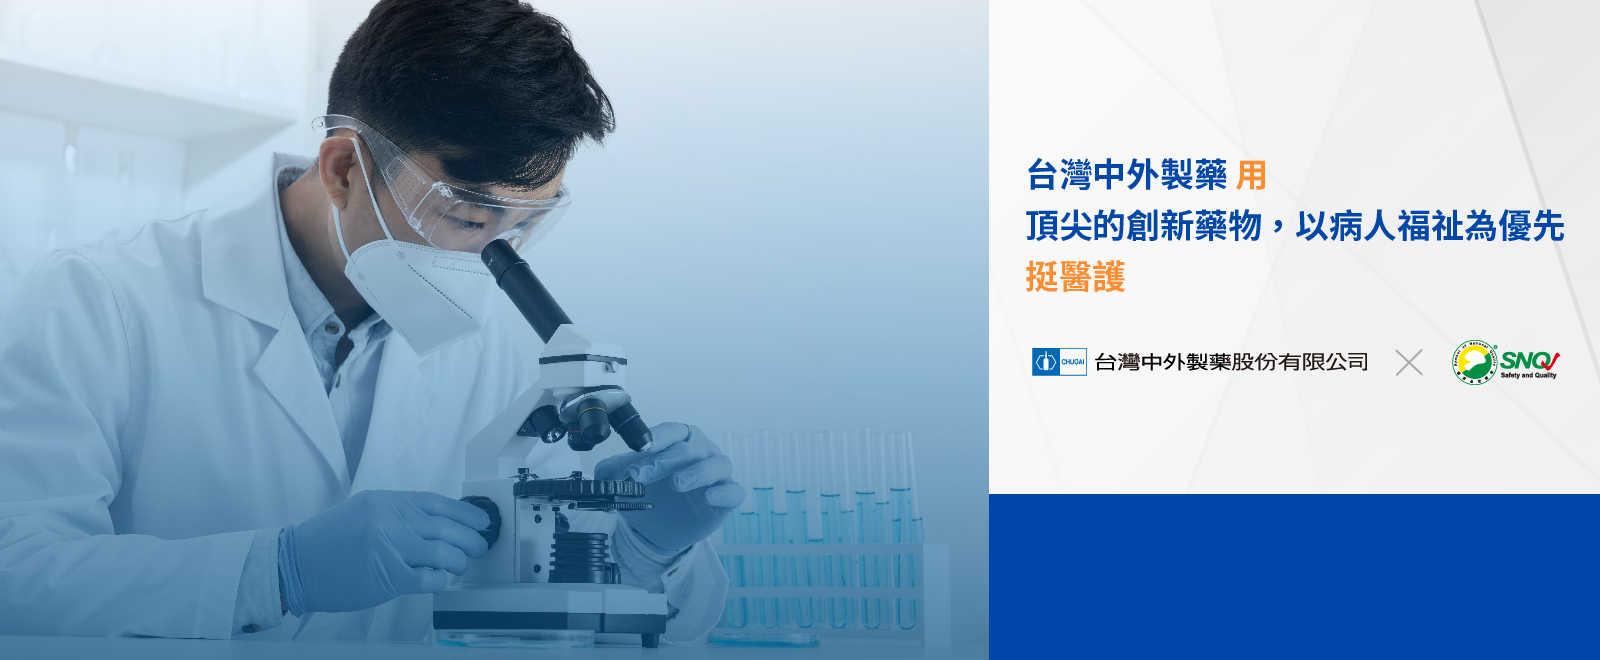 Chugai Pharma Taiwan supports doctors and nurses with innovative drugs, embracing patient-centric.